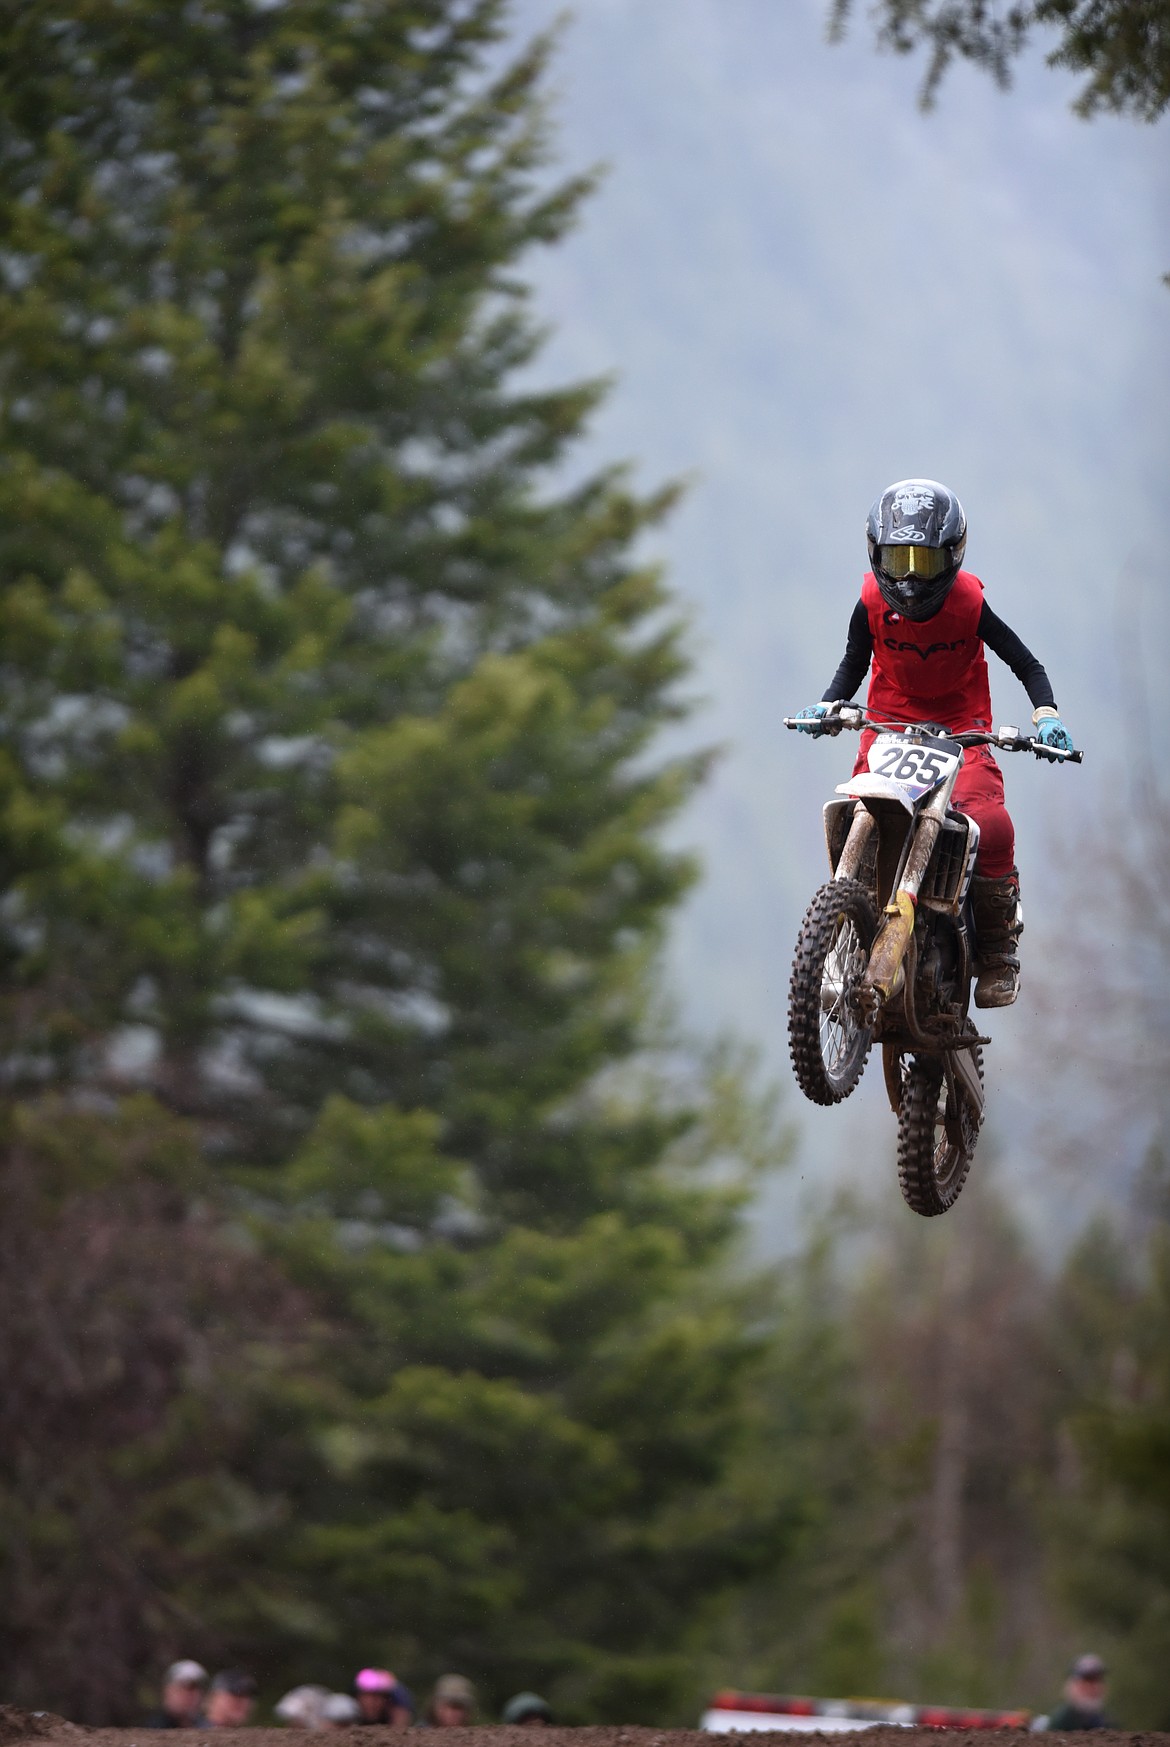 Cole Trenkle flies through the air Saturday during the Hungry Horse motocross races. (Jeremy Weber/Daily Inter Lake)